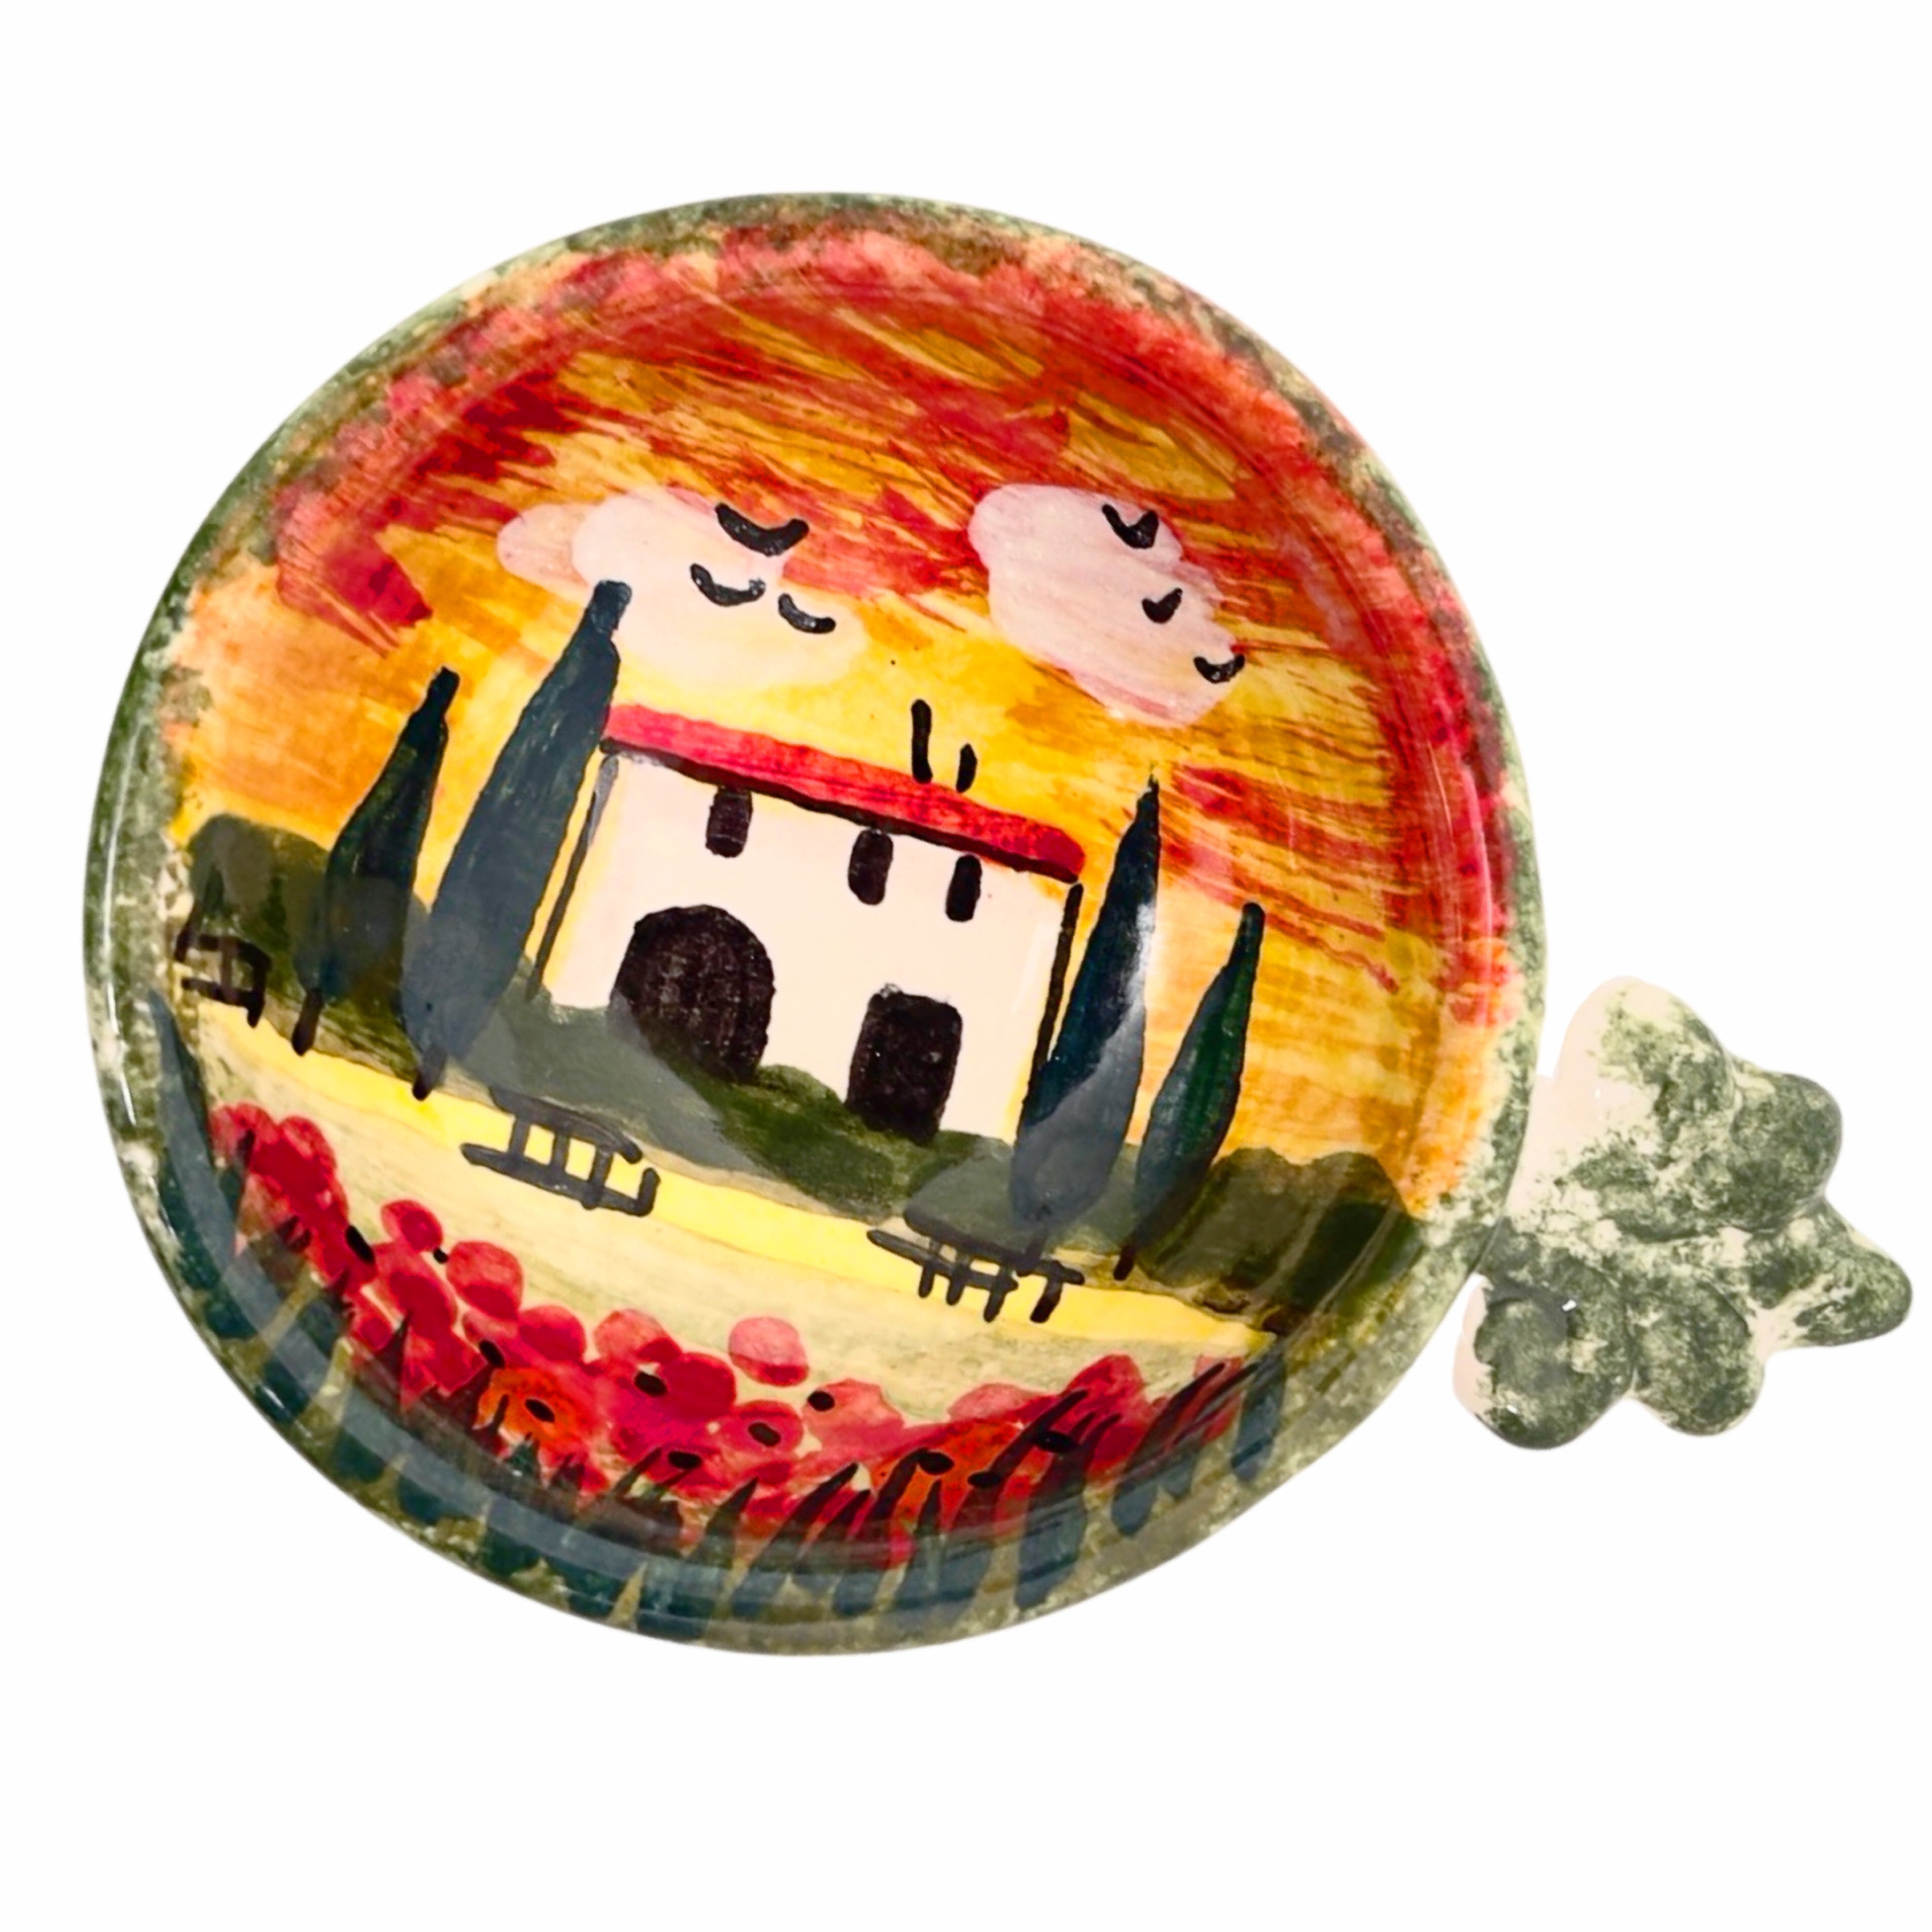 Tuscan Sunset Countryside Condiment Bowl with Green Handle, ceramics, pottery, italian design, majolica, handmade, handcrafted, handpainted, home decor, kitchen art, home goods, deruta, majolica, Artisan, treasures, traditional art, modern art, gift ideas, style, SF, shop small business, artists, shop online, landmark store, legacy, one of a kind, limited edition, gift guide, gift shop, retail shop, decorations, shopping, italy, home staging, home decorating, home interiors